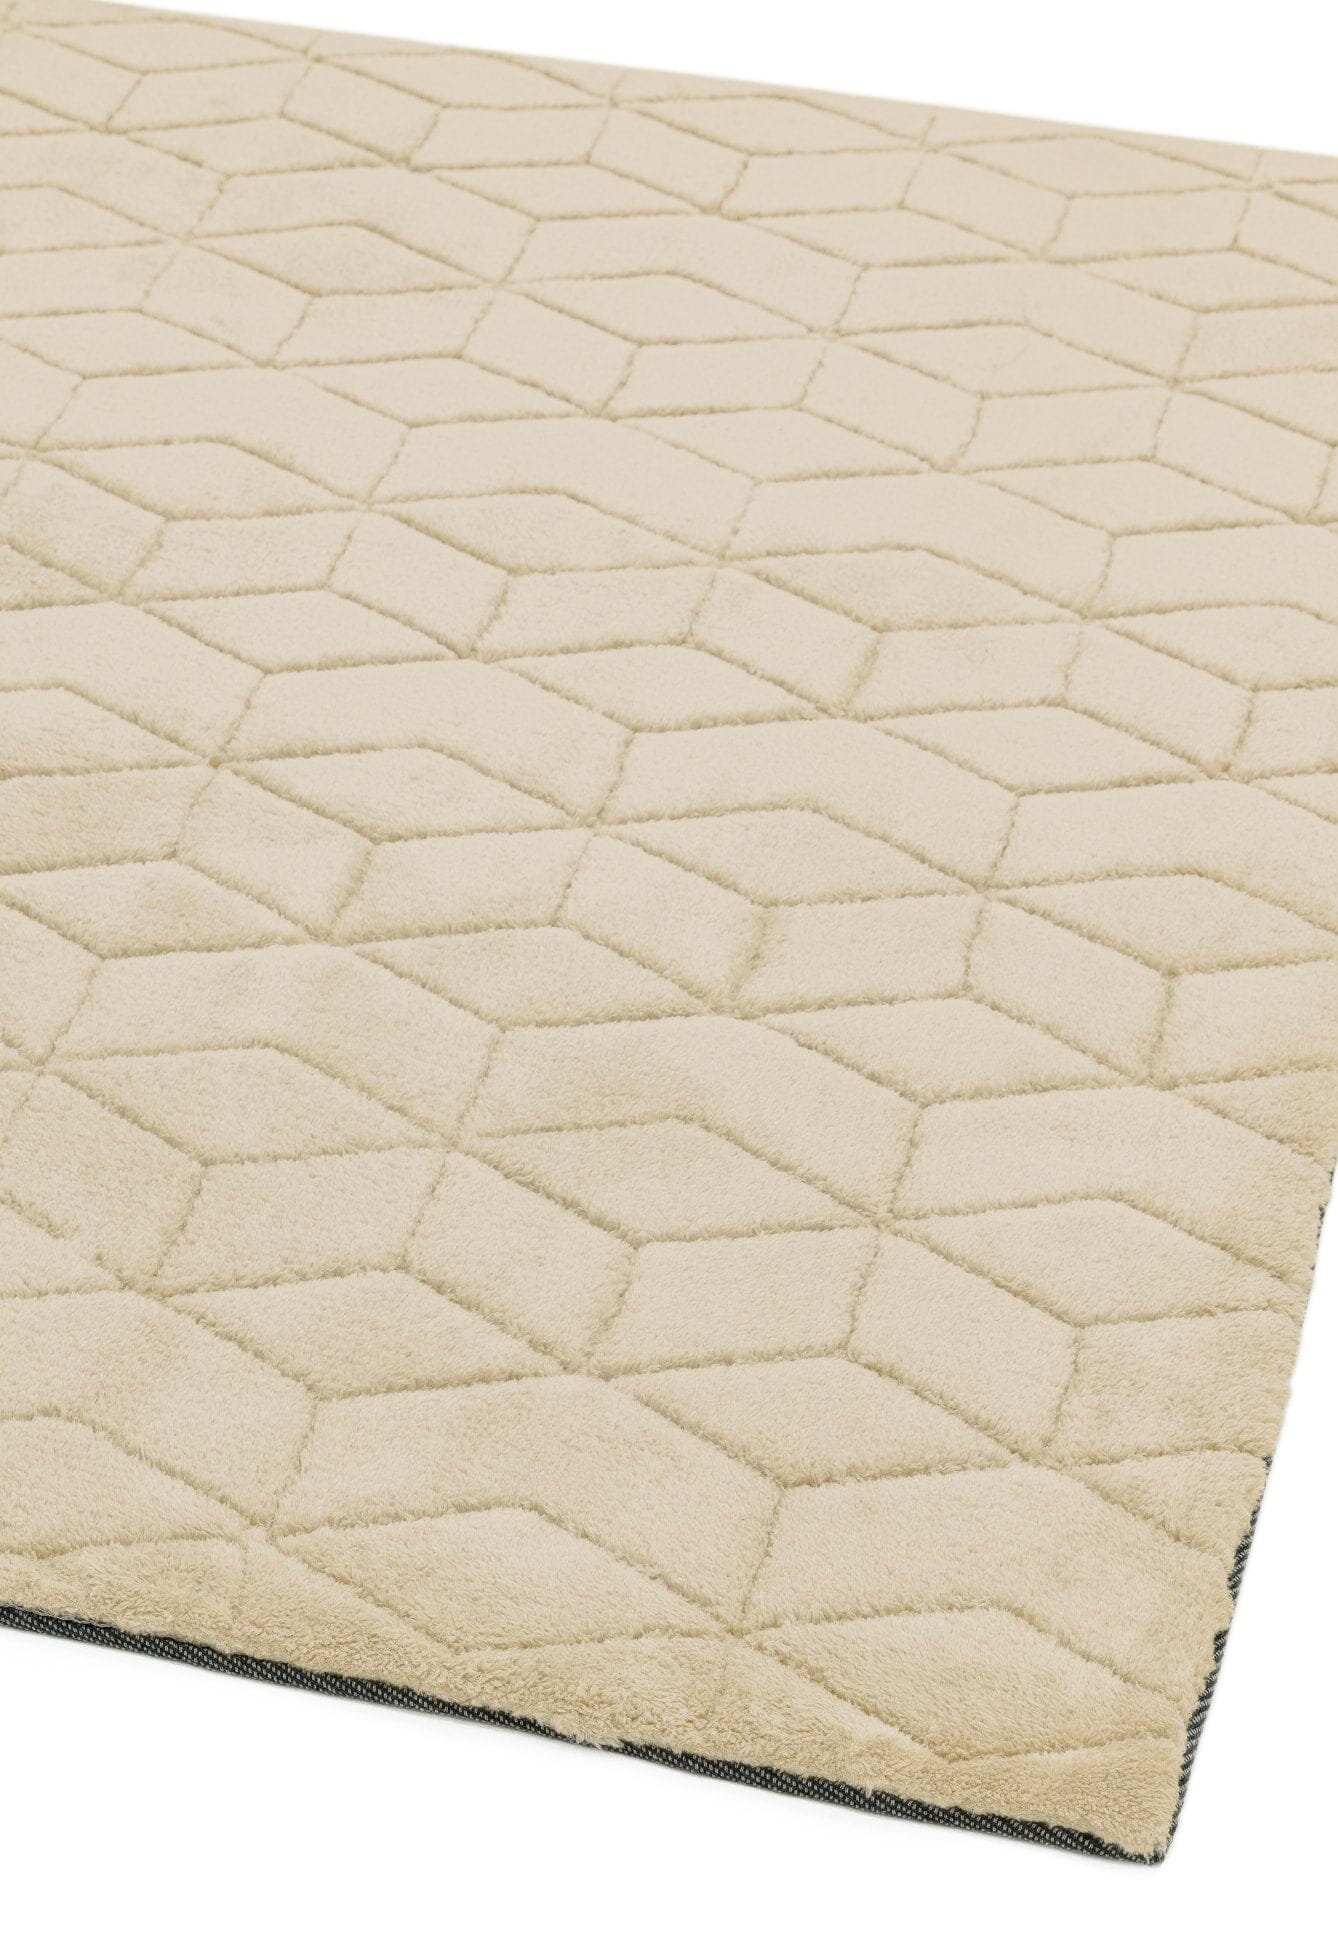 Asiatic Carpets Cozy knitted Rug Beige - 160 x 230cm